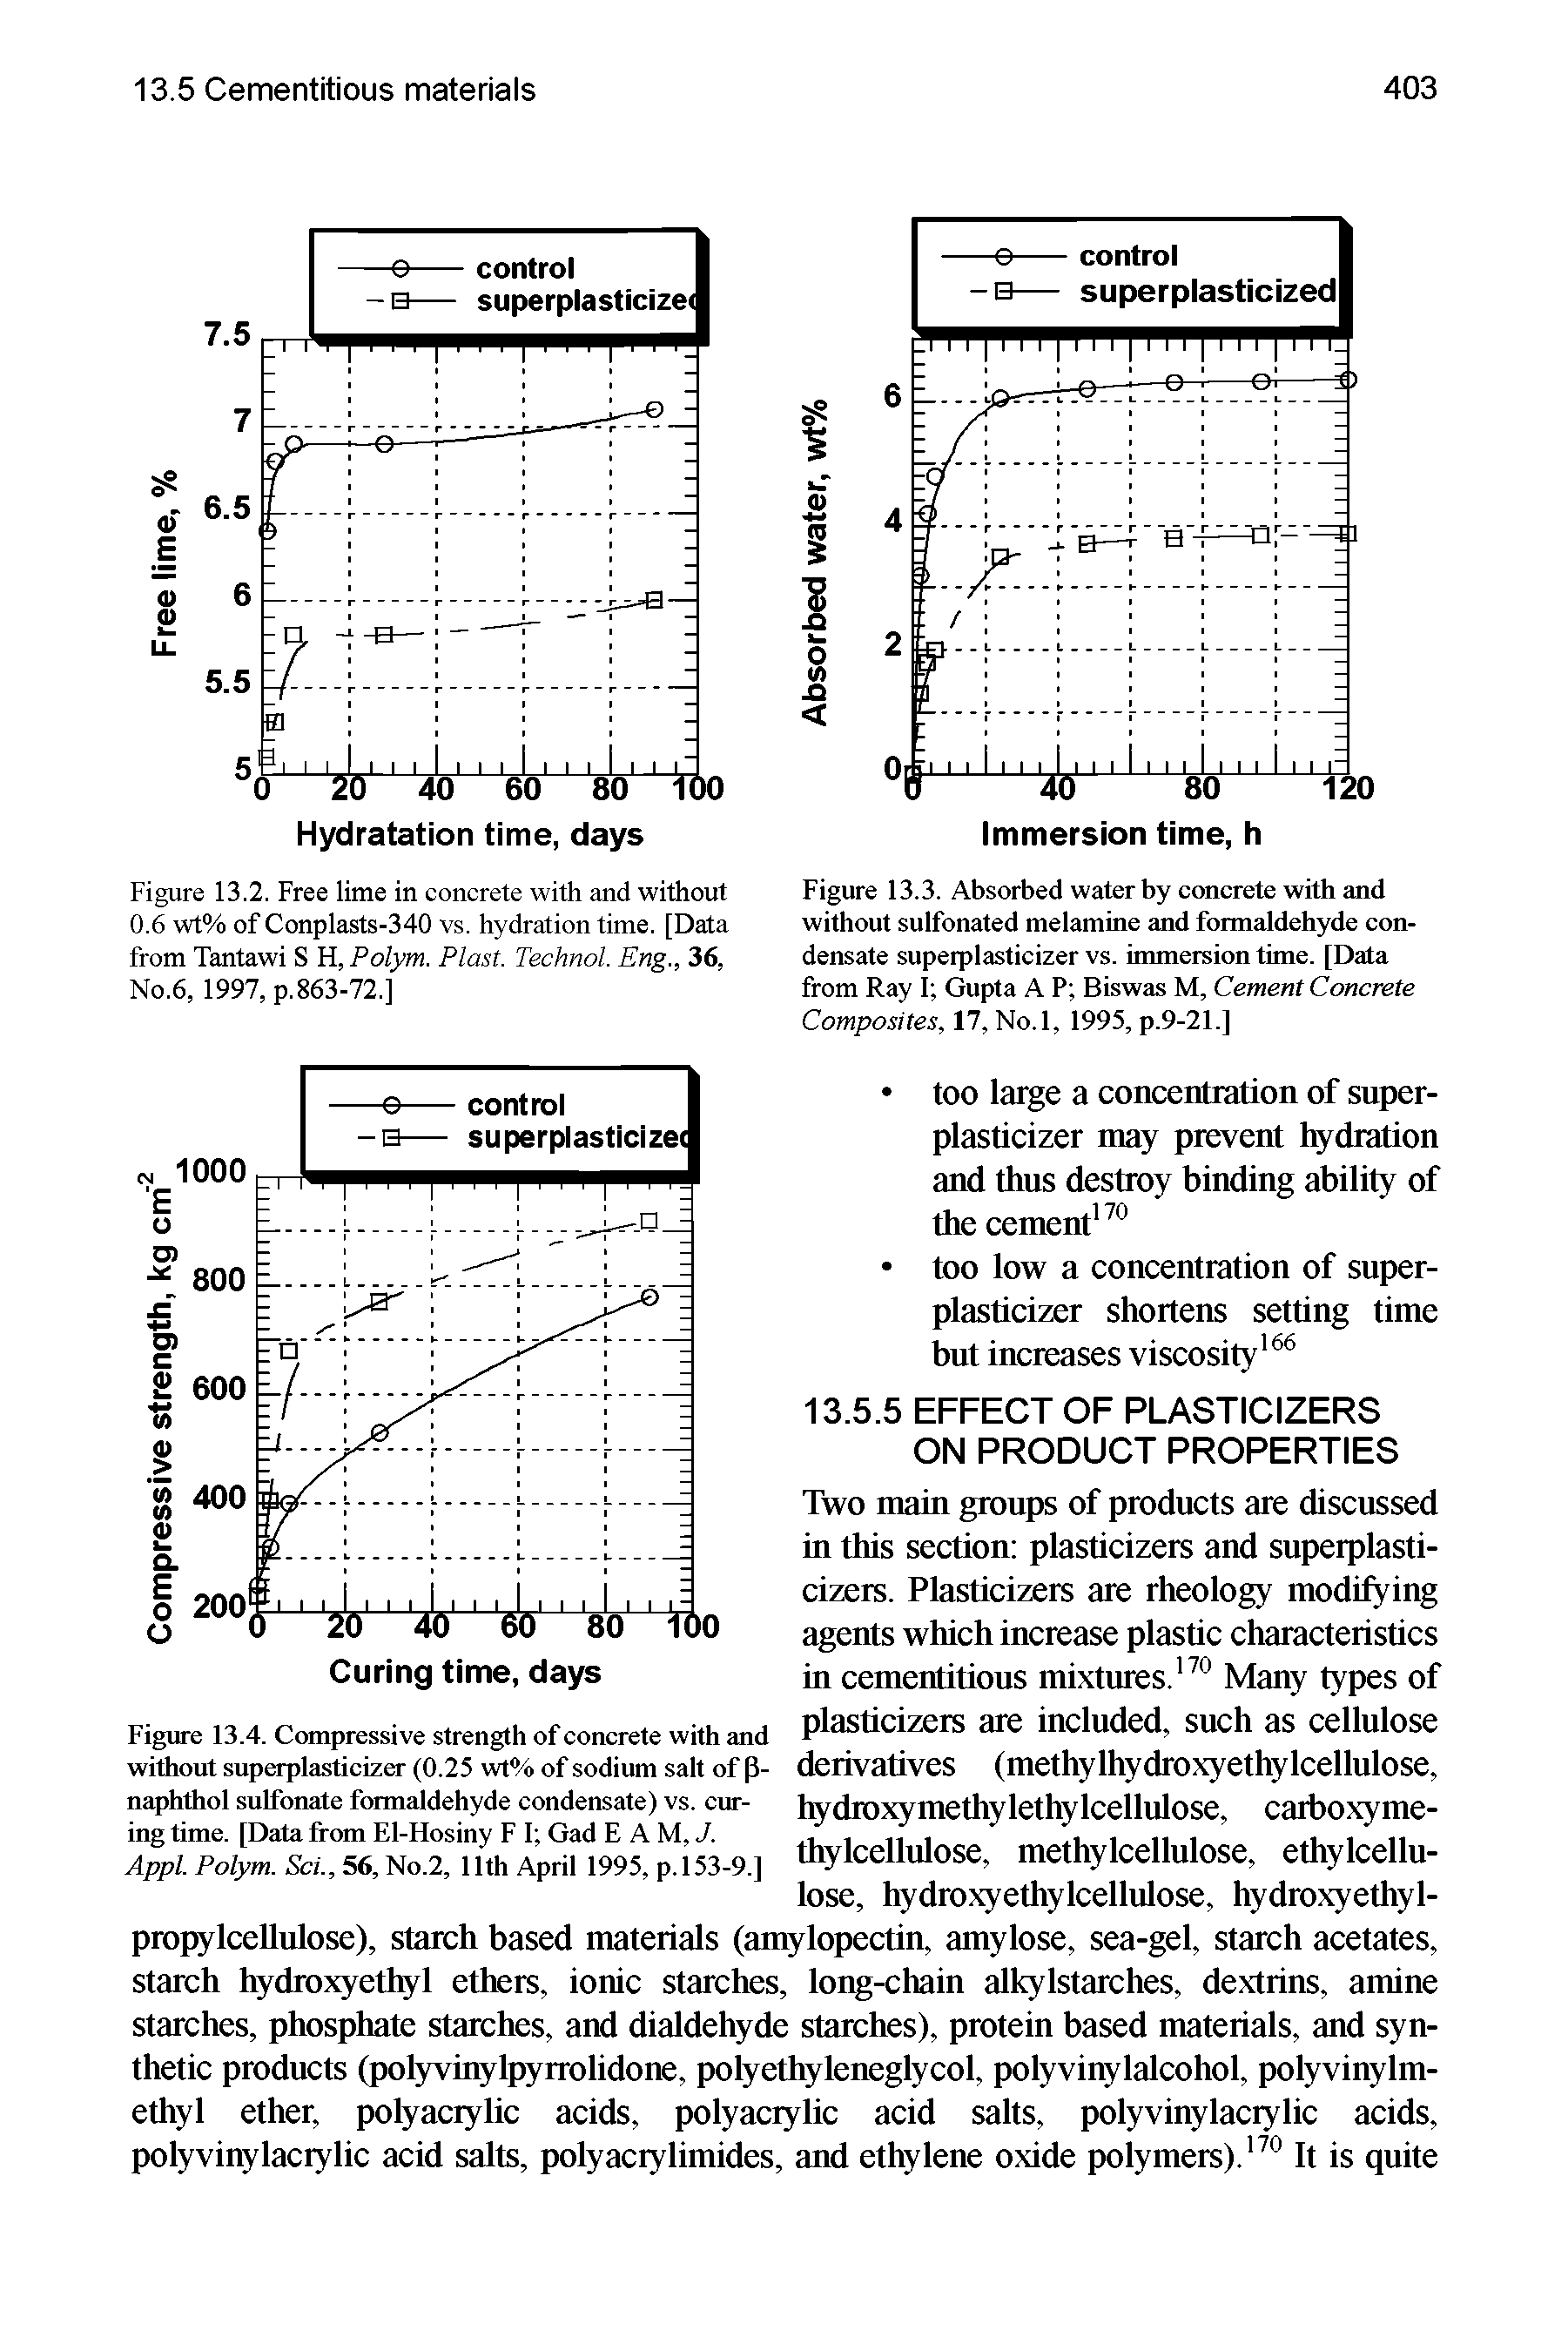 Figure 13.4. Compressive strength of concrete with and without superplasticizer (0.25 wt% of sodium salt of P-naphthol sulfonate formaldehyde condensate) vs. curing time. [Data from El-Hosiny F I Gad E A M, J. Appl Polym. Set., 56, No.2, 11th April 1995, p. 153-9.]...